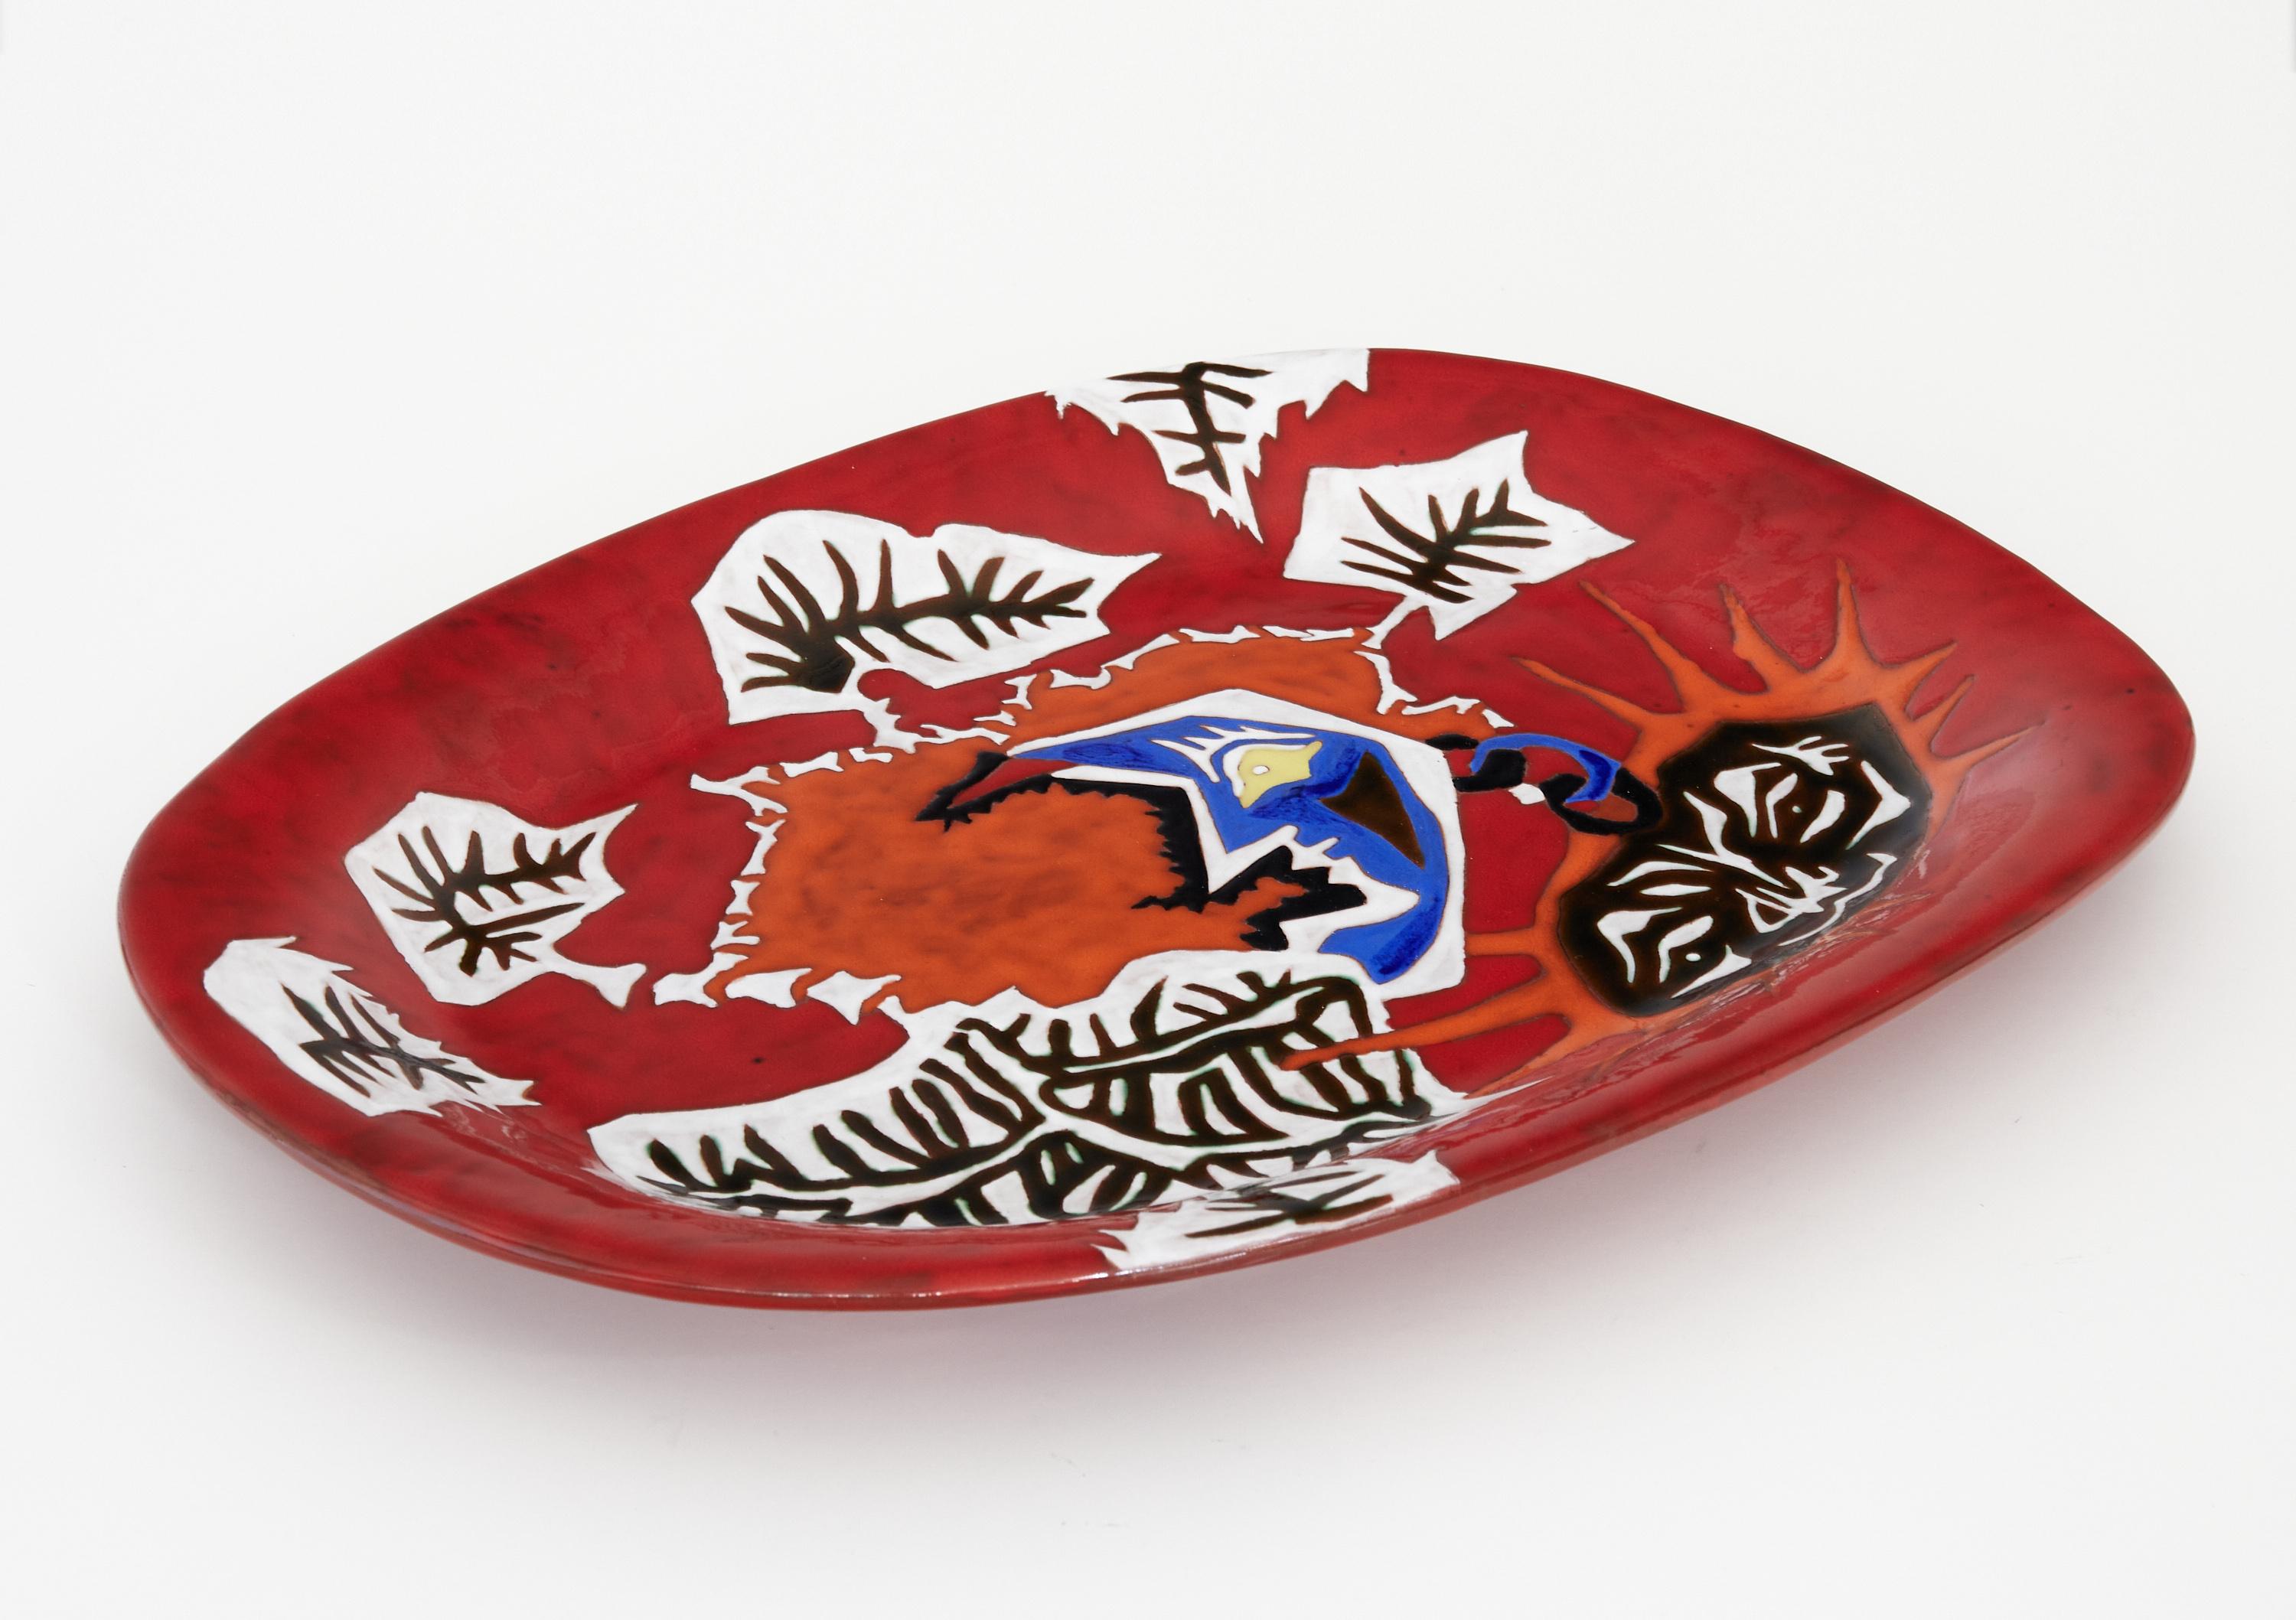 Mid-century red glazed ceramic dish by Jean Lurçat for Sant Vicens marked 1/50.

Jean LURÇAT was a famous French painter and ceramist whose paintings were also transposed on beautiful Aubusson tapestries. 

This rare dish from an edition of 50